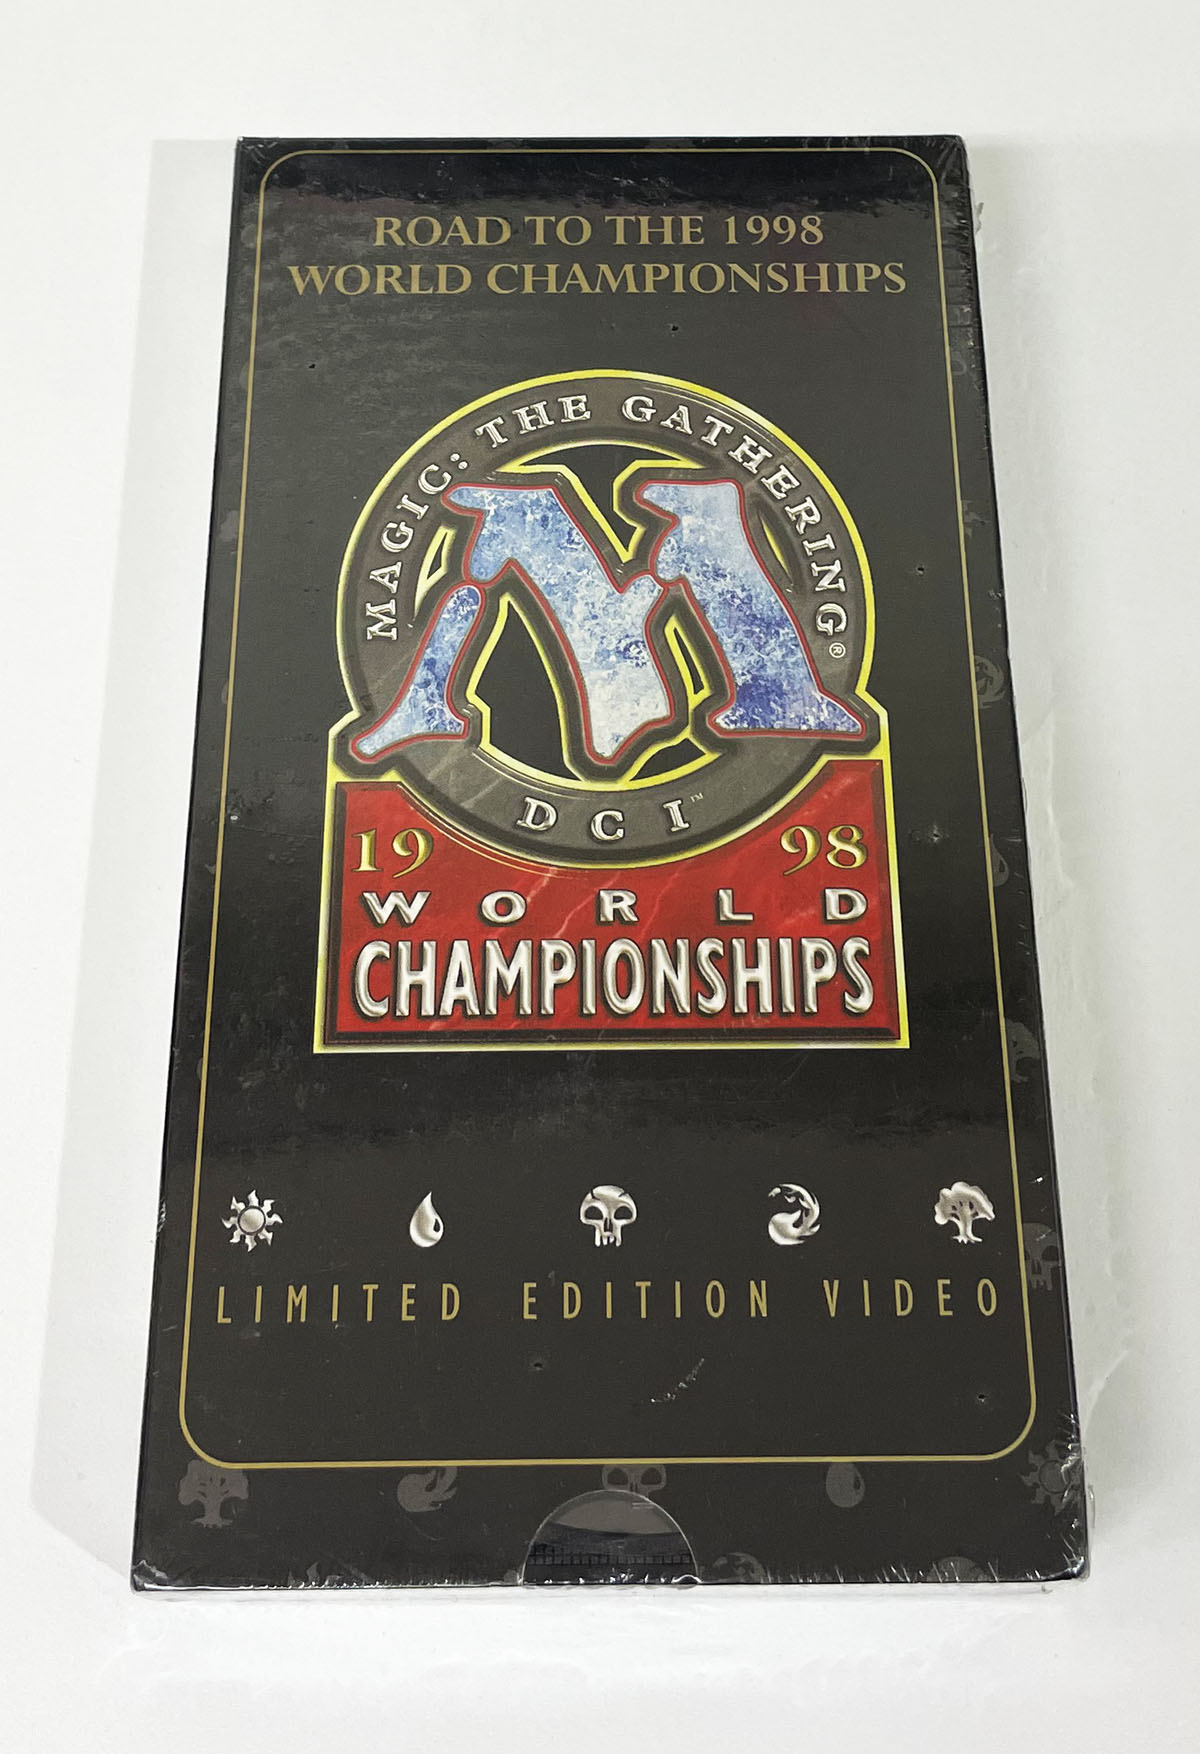 Road to the 1998 World Championships Limited Edition Video VHS